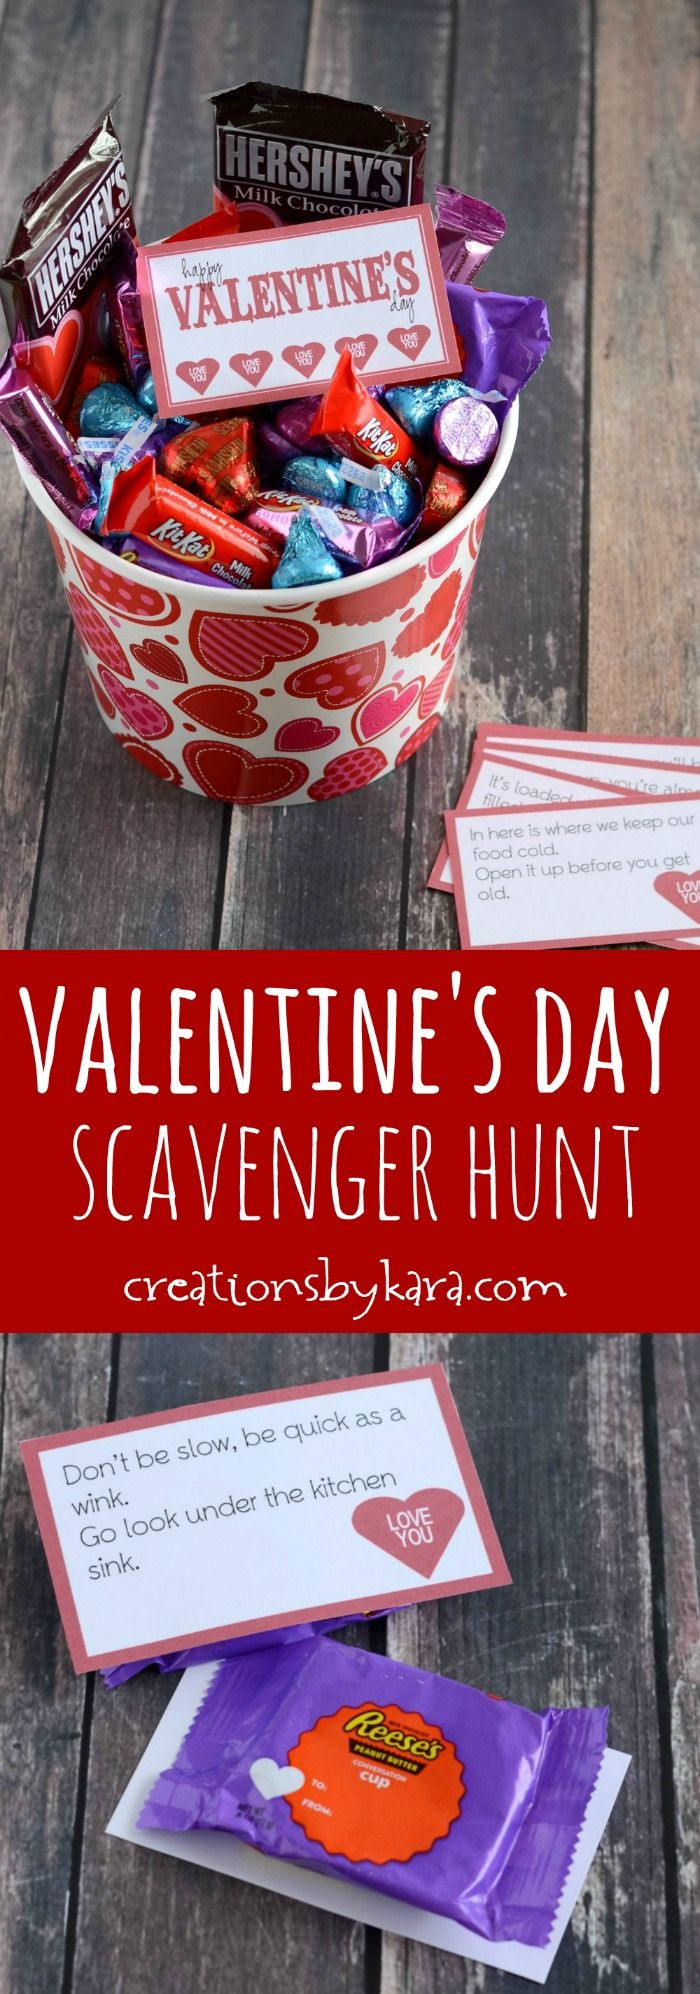 Fun Valentines Day Gifts
 Use these FREE printable clues to make a fun Valentines